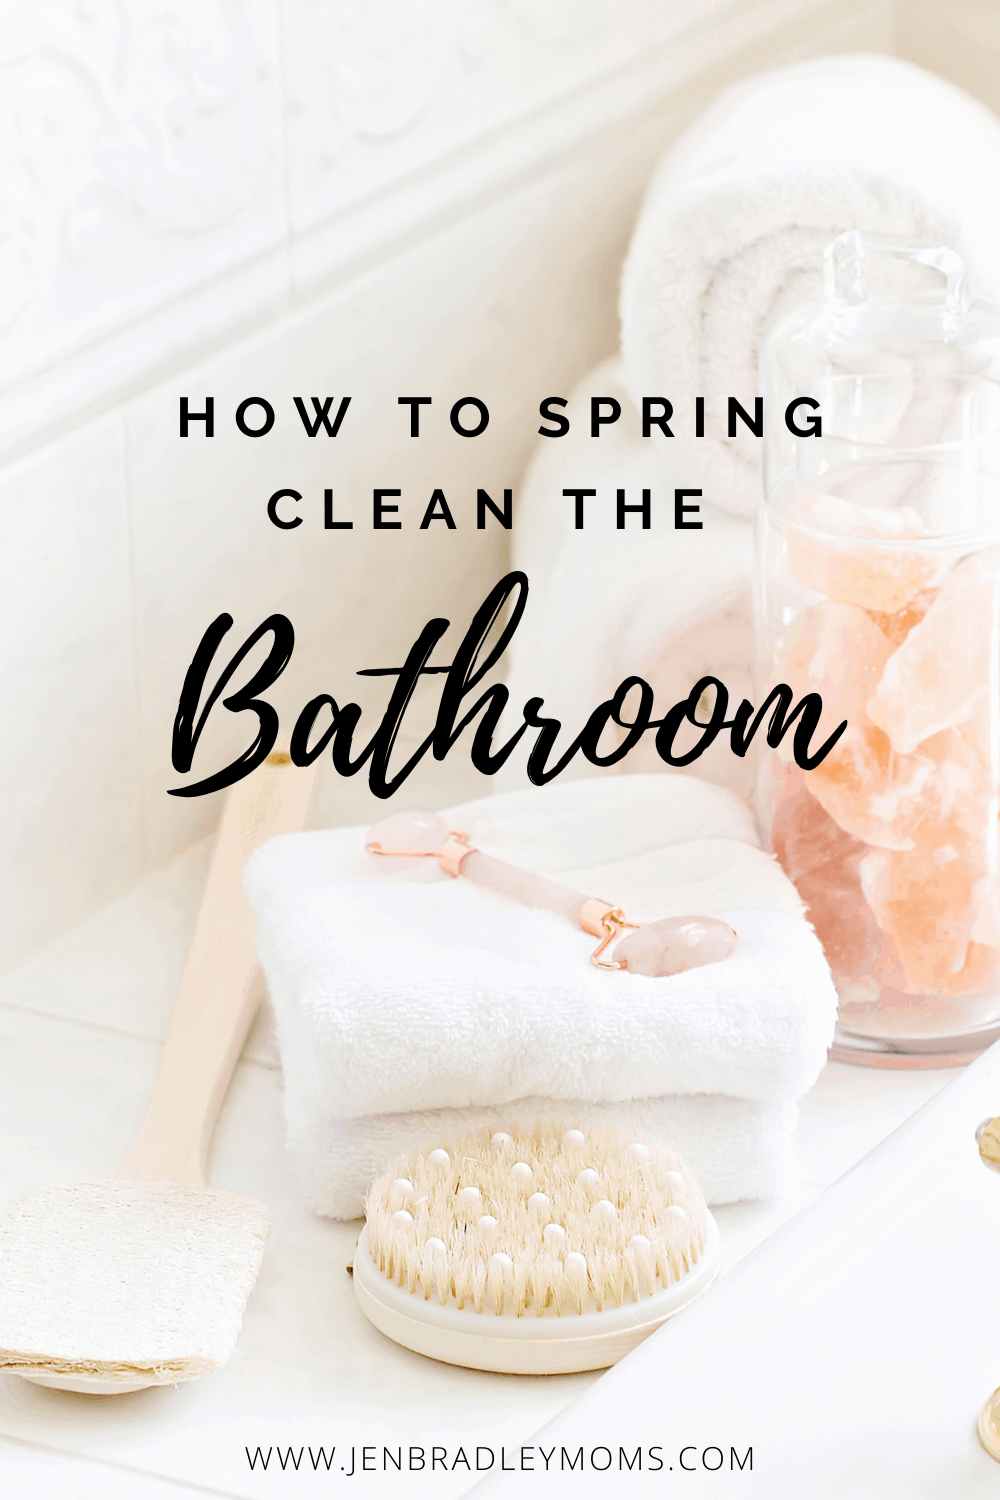 How to Deep Clean Your Bathroom - The Simplified Way